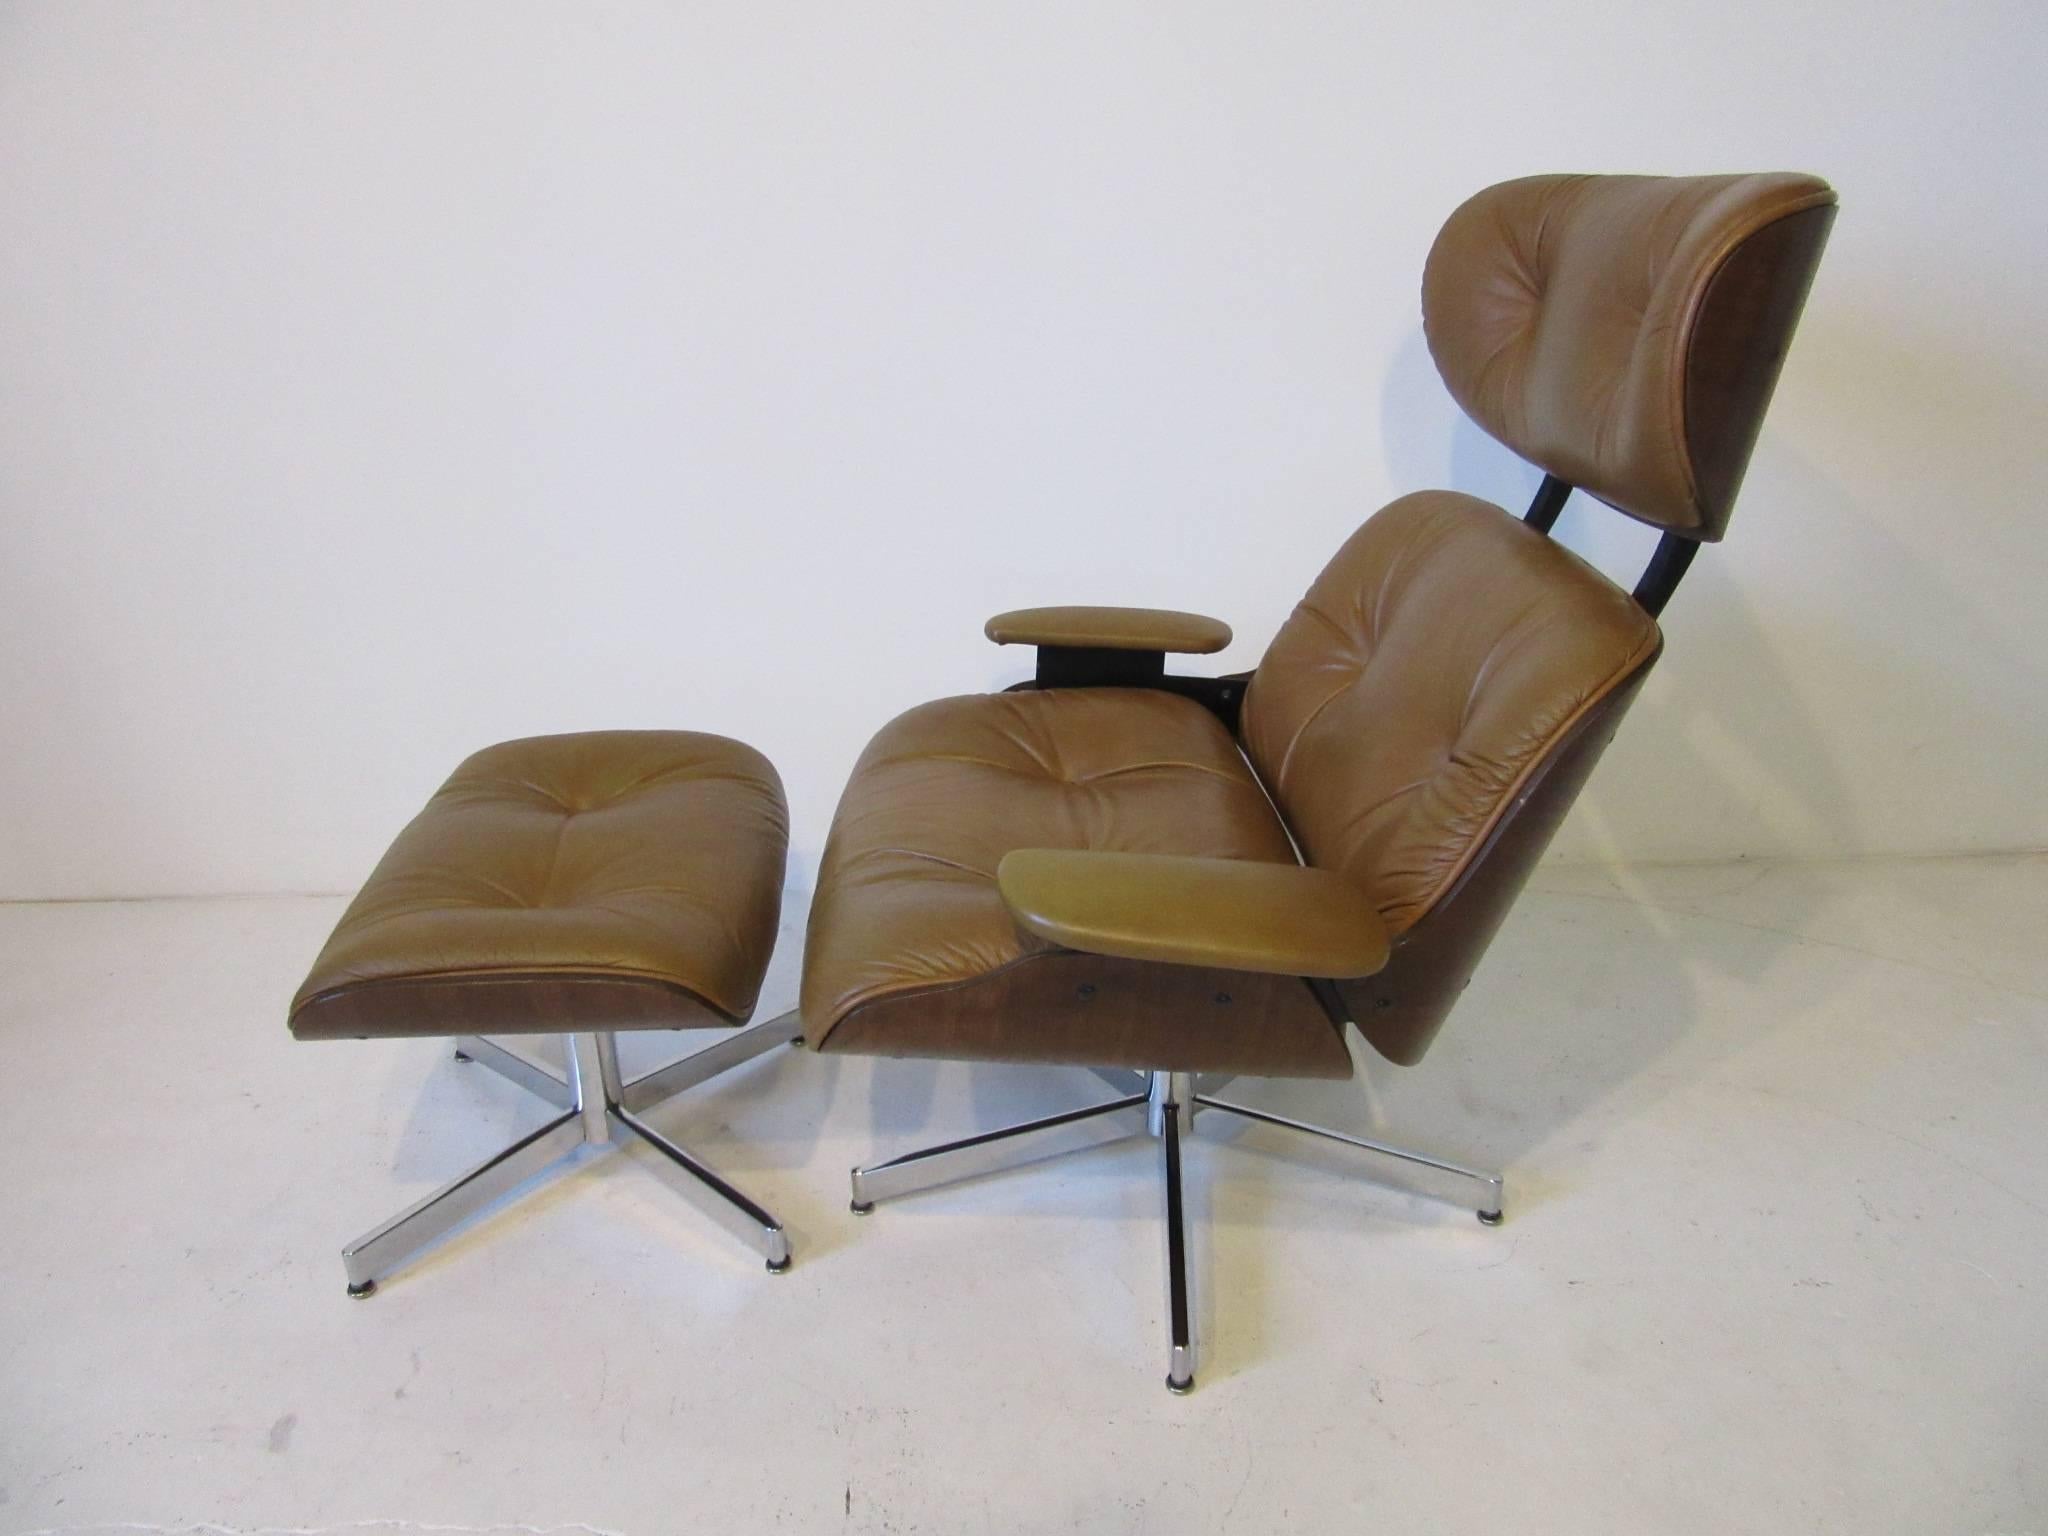 A cognac colored leather lounge chair with matching ottoman and bent walnut body with chromed metal bases. The plycraft model has an adjustable spring for rocking and comfort unlike the Eames chair which has a set angle and is uncomfortable to some.